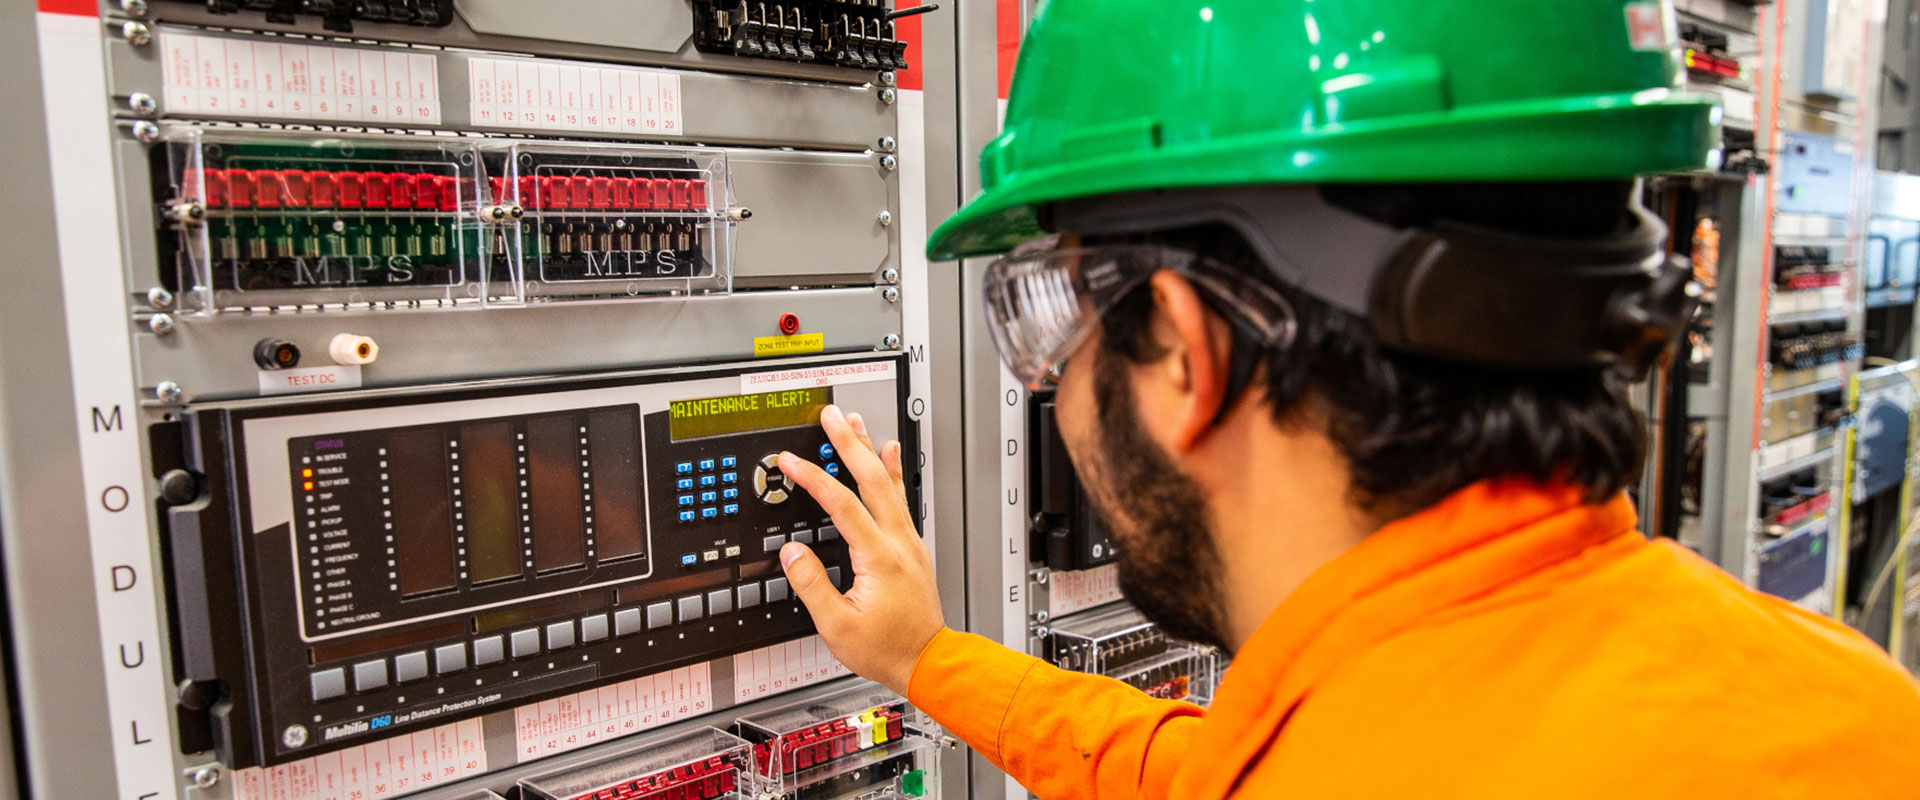 B&M specialized technician conducting tests and maintenance of an electrical system